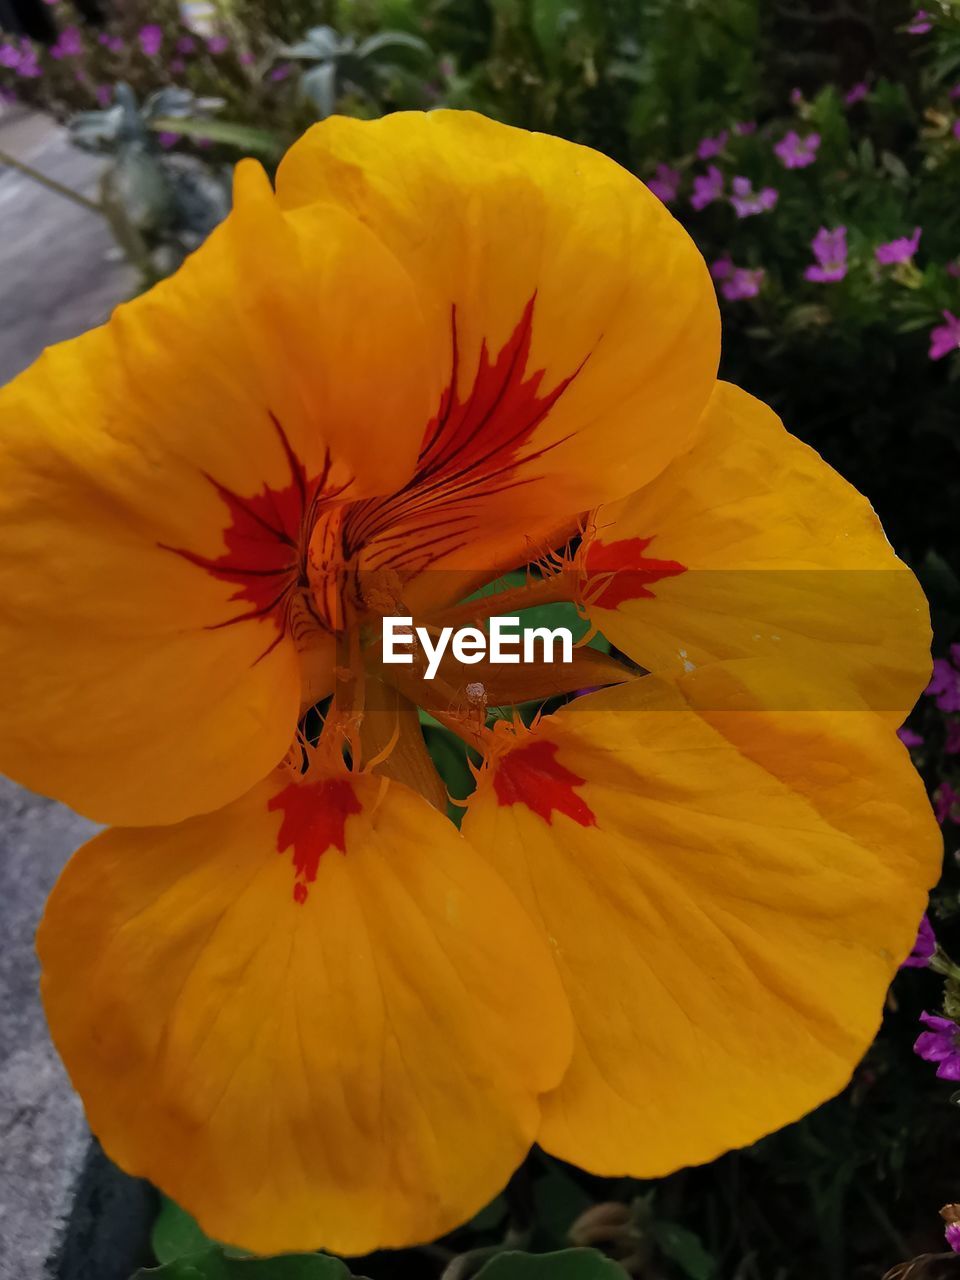 flower, flowering plant, plant, yellow, freshness, beauty in nature, petal, flower head, nature, close-up, fragility, inflorescence, growth, no people, outdoors, pollen, multi colored, blossom, botany, vibrant color, stamen, wildflower, day, poppy, springtime, focus on foreground